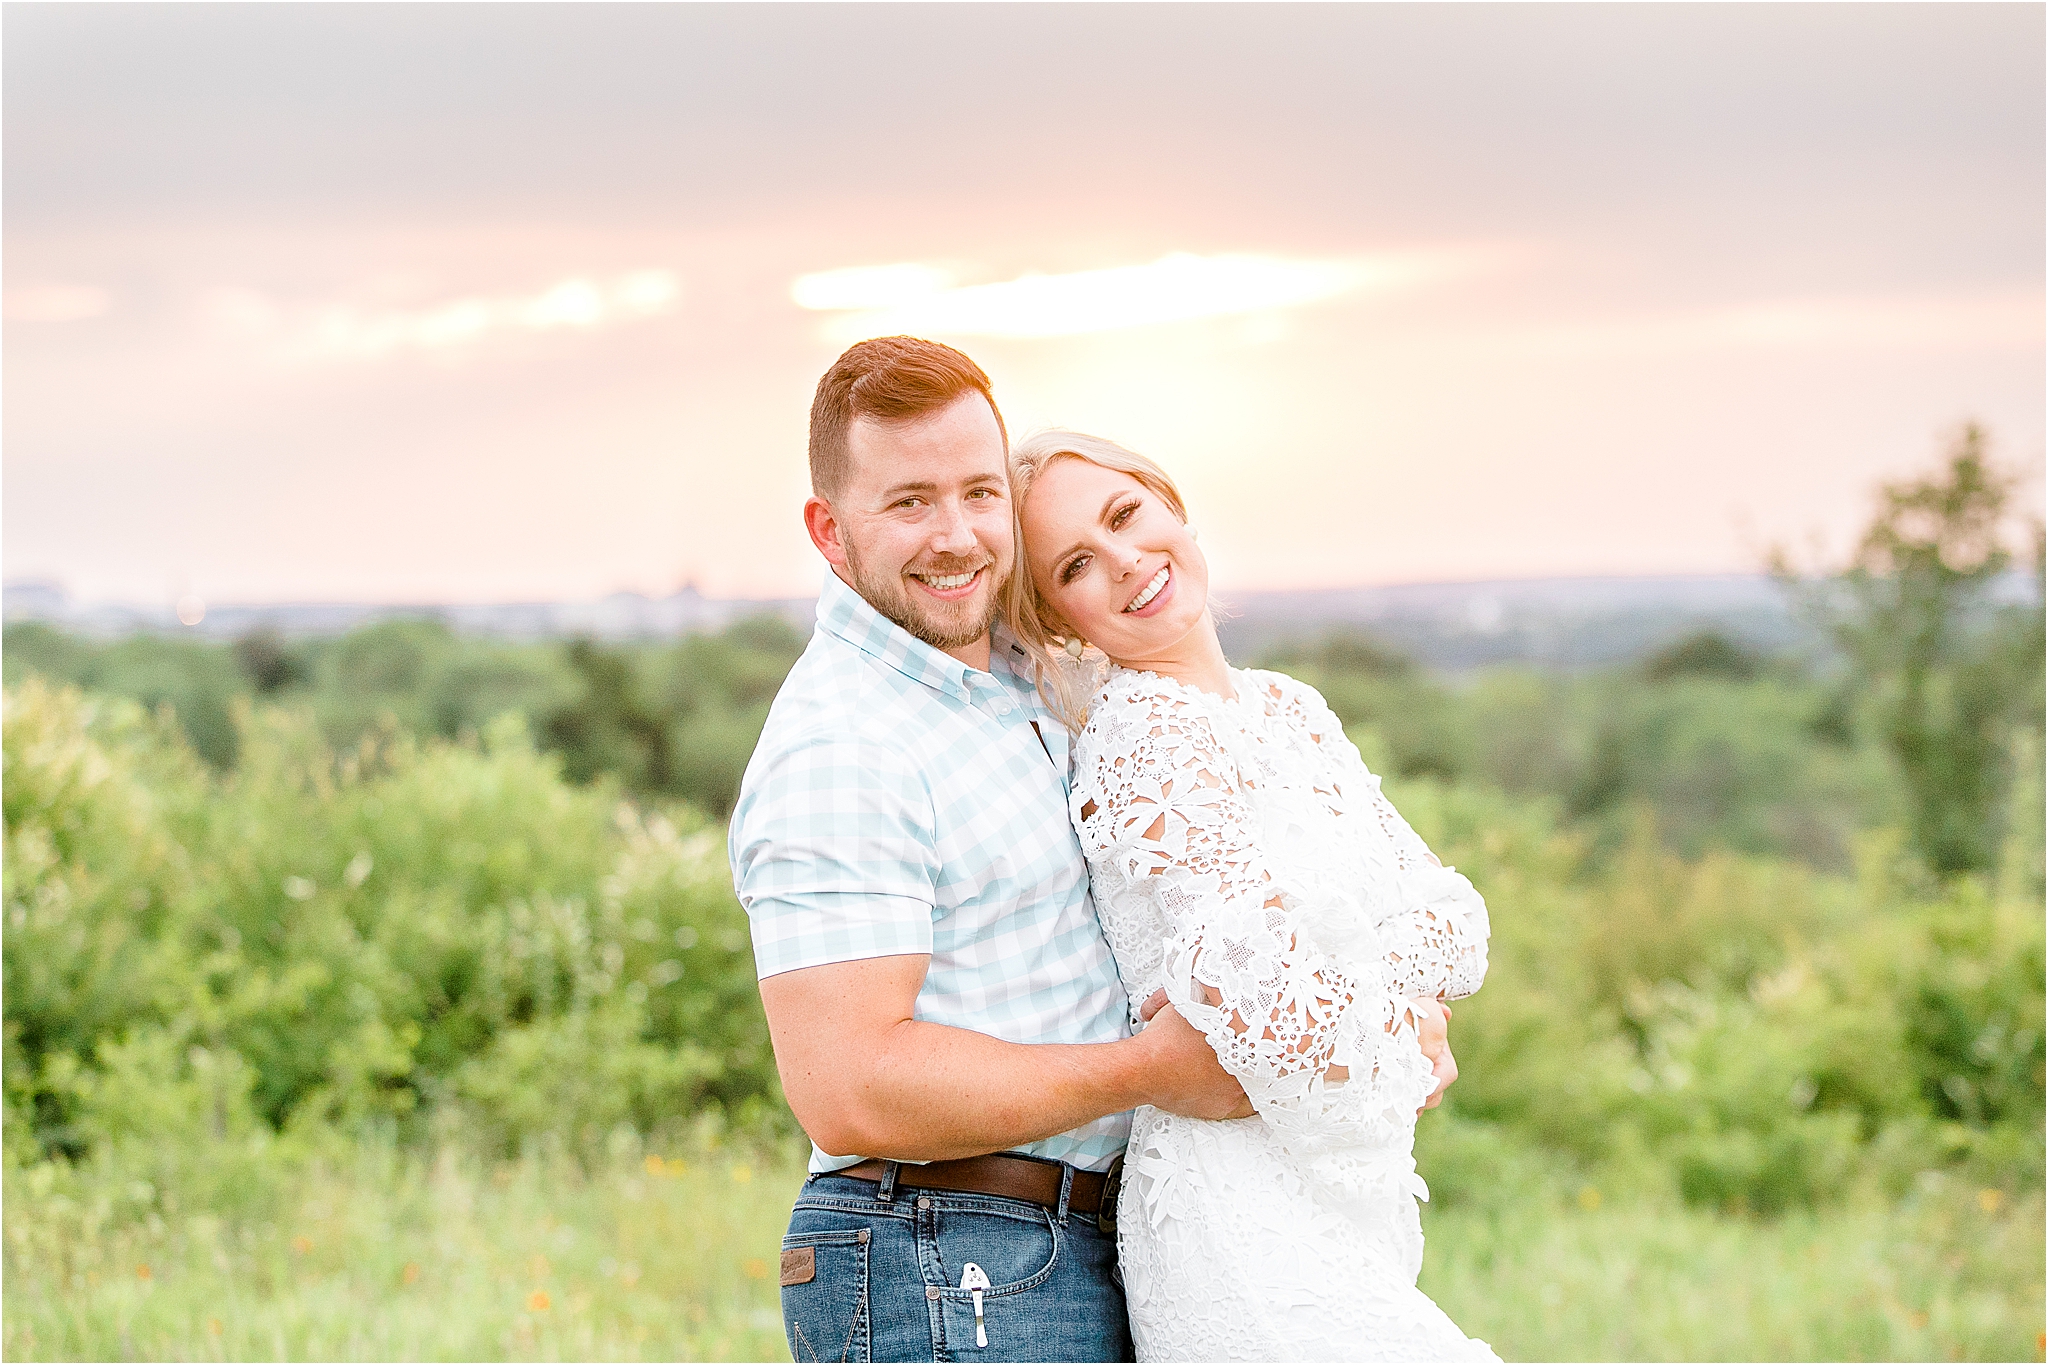 A bride to be spins into her grooms arms while they are dancing in front of greenery and a colorful sunset during their fort worth engagement session at Tandy Hills Nature Preserve 